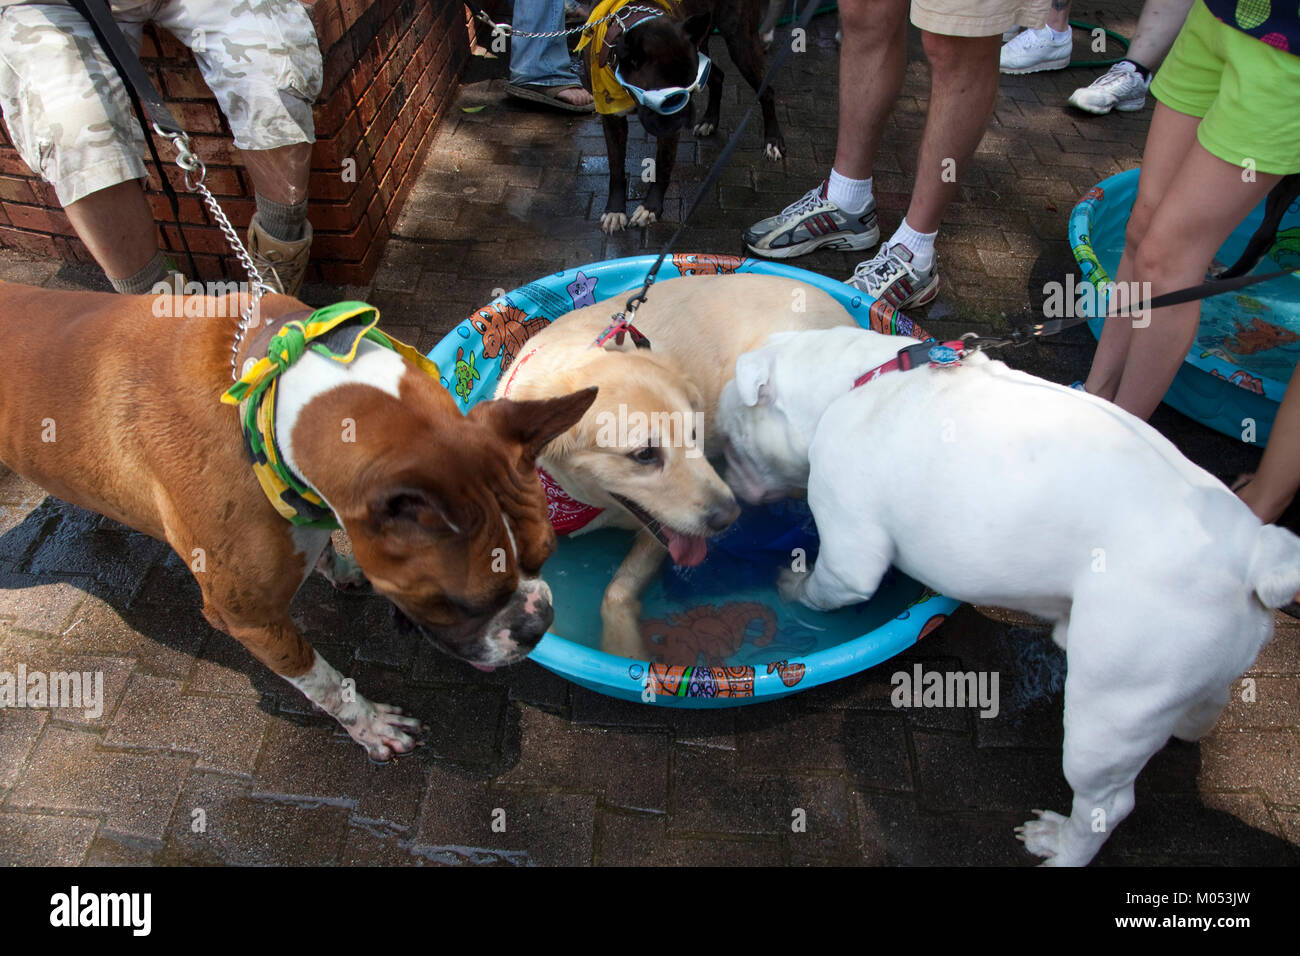 Three dogs in a pool Stock Photo